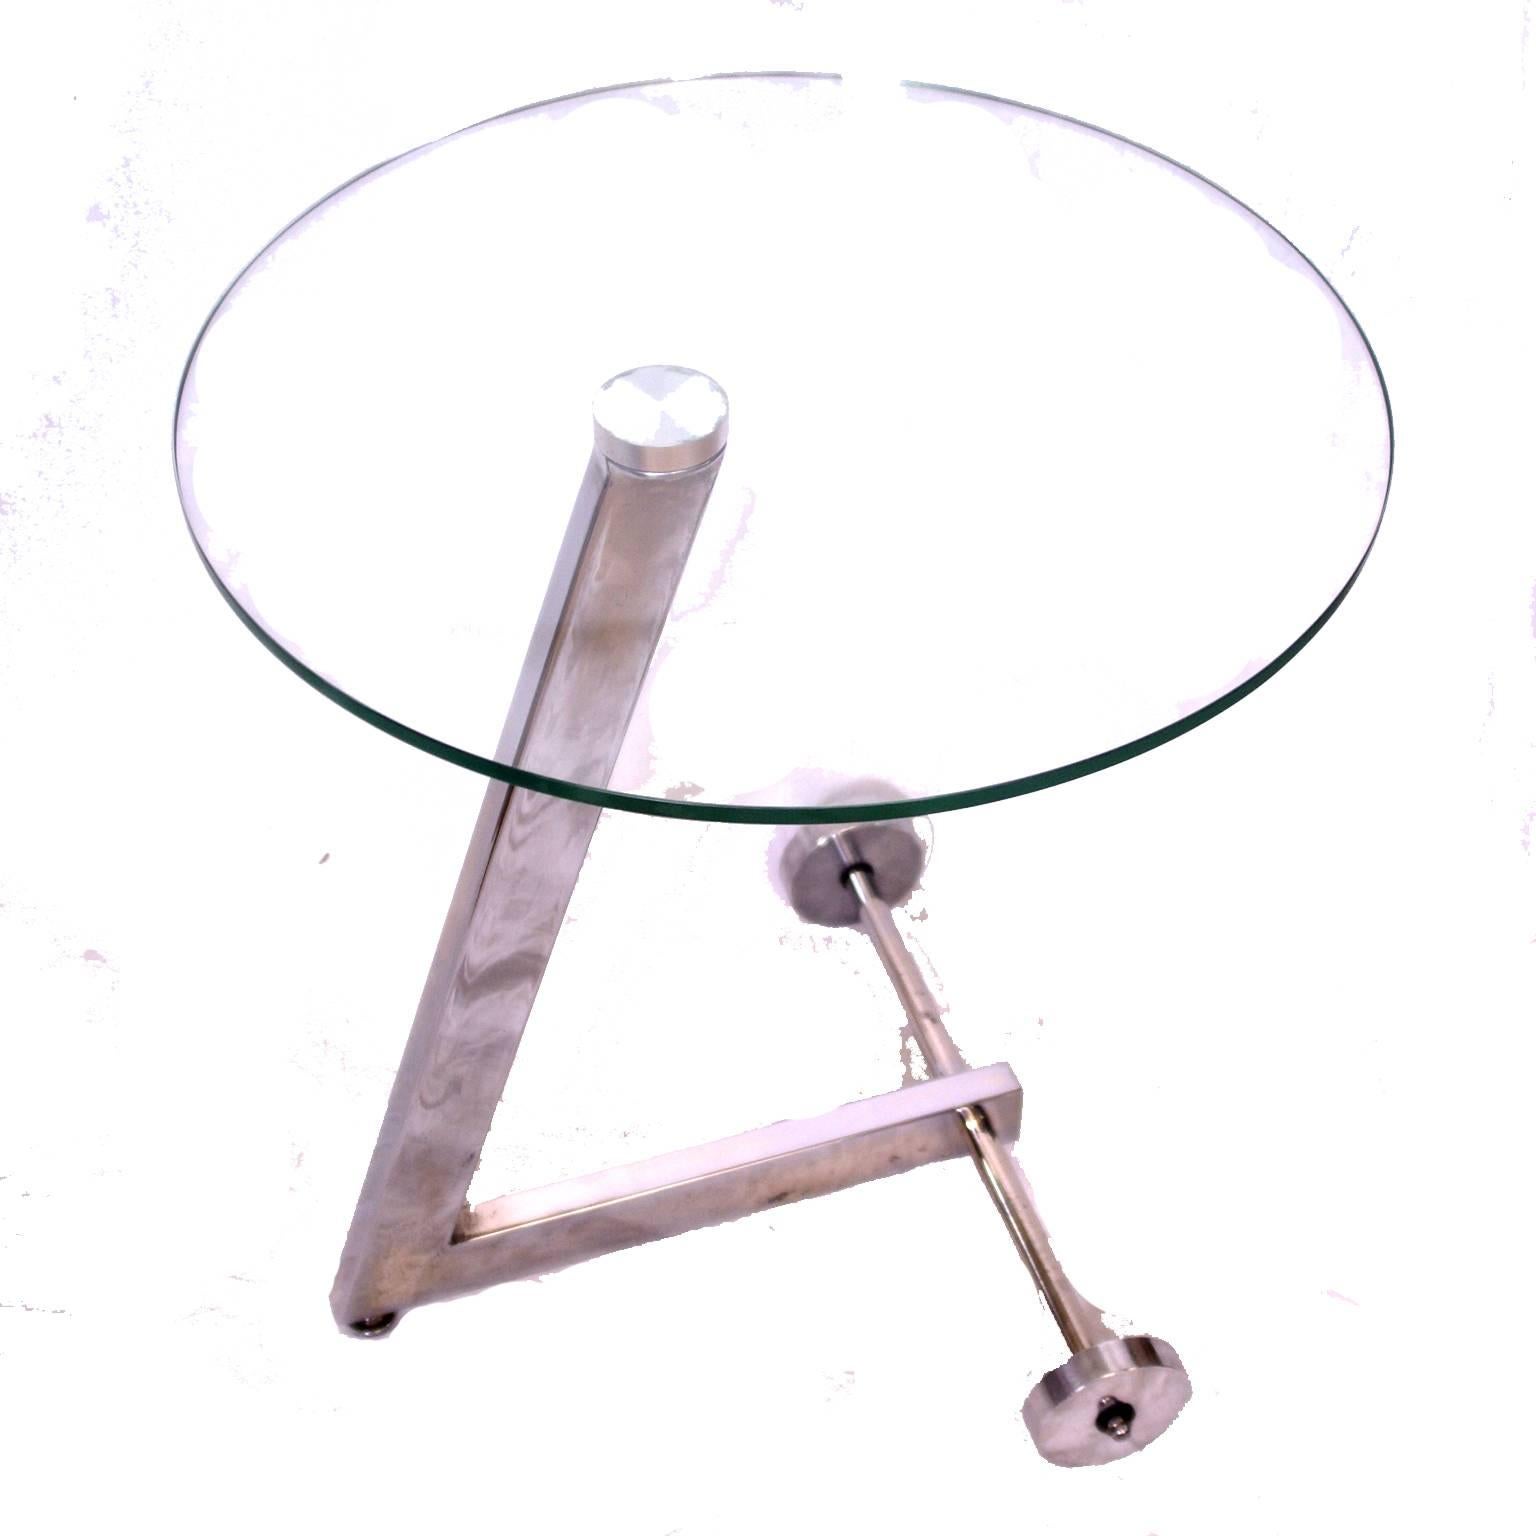 Round, 1960s glass and chrome wheeled side table. 
Glass side table on chromed steel stand with two solid aluminium wheels.
Striking and unusual table in good original condition. Unrestored, the item has a gentle patina with some loss of the